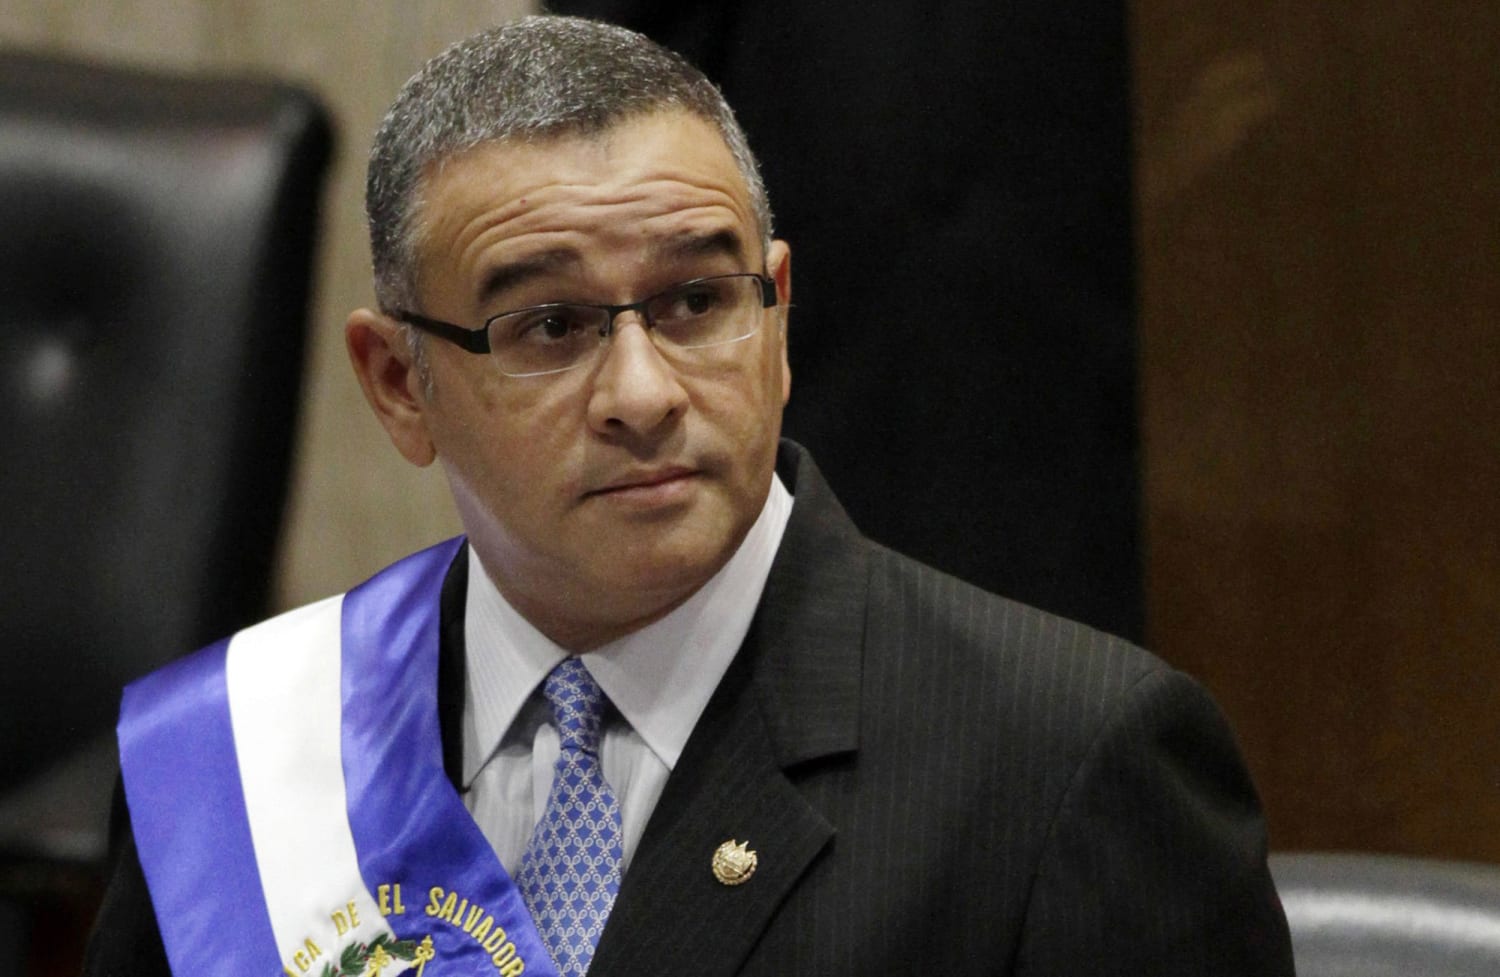 Ex-El Salvador president sentenced to 14 years for negotiating with gangs